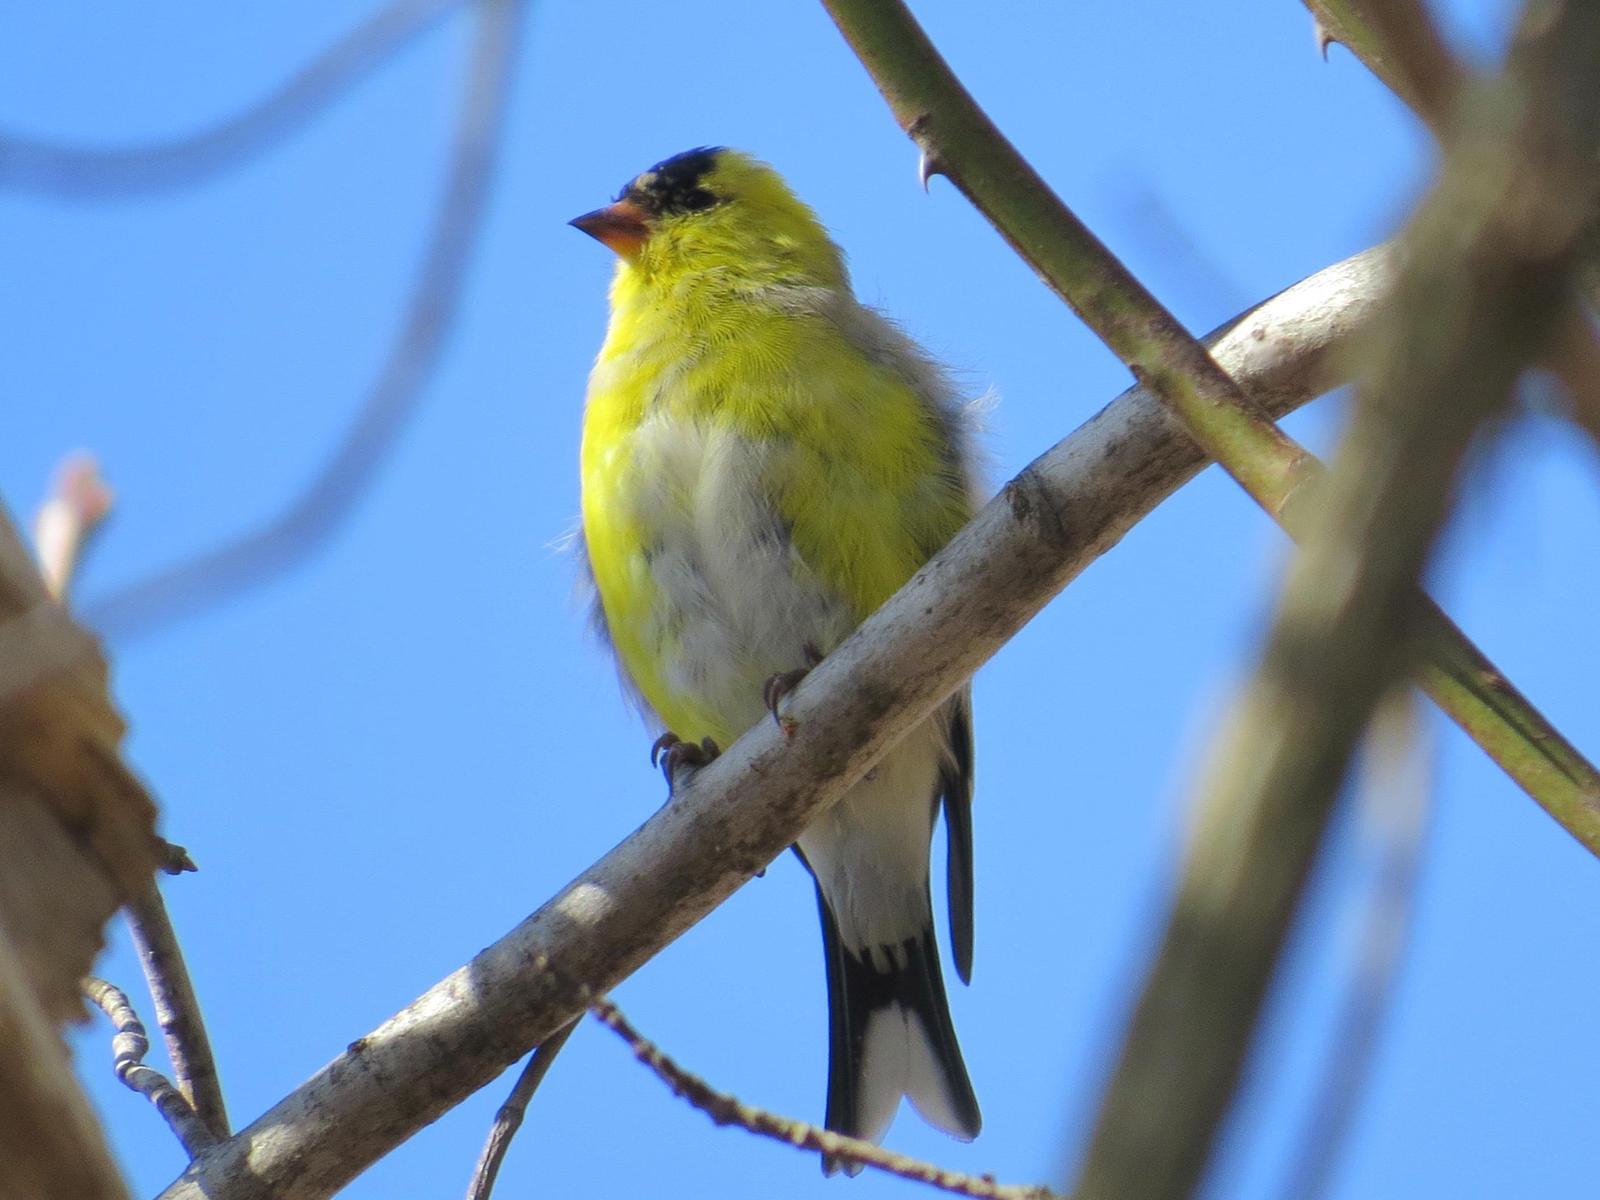 American Goldfinch Photo by Kathy Wooding